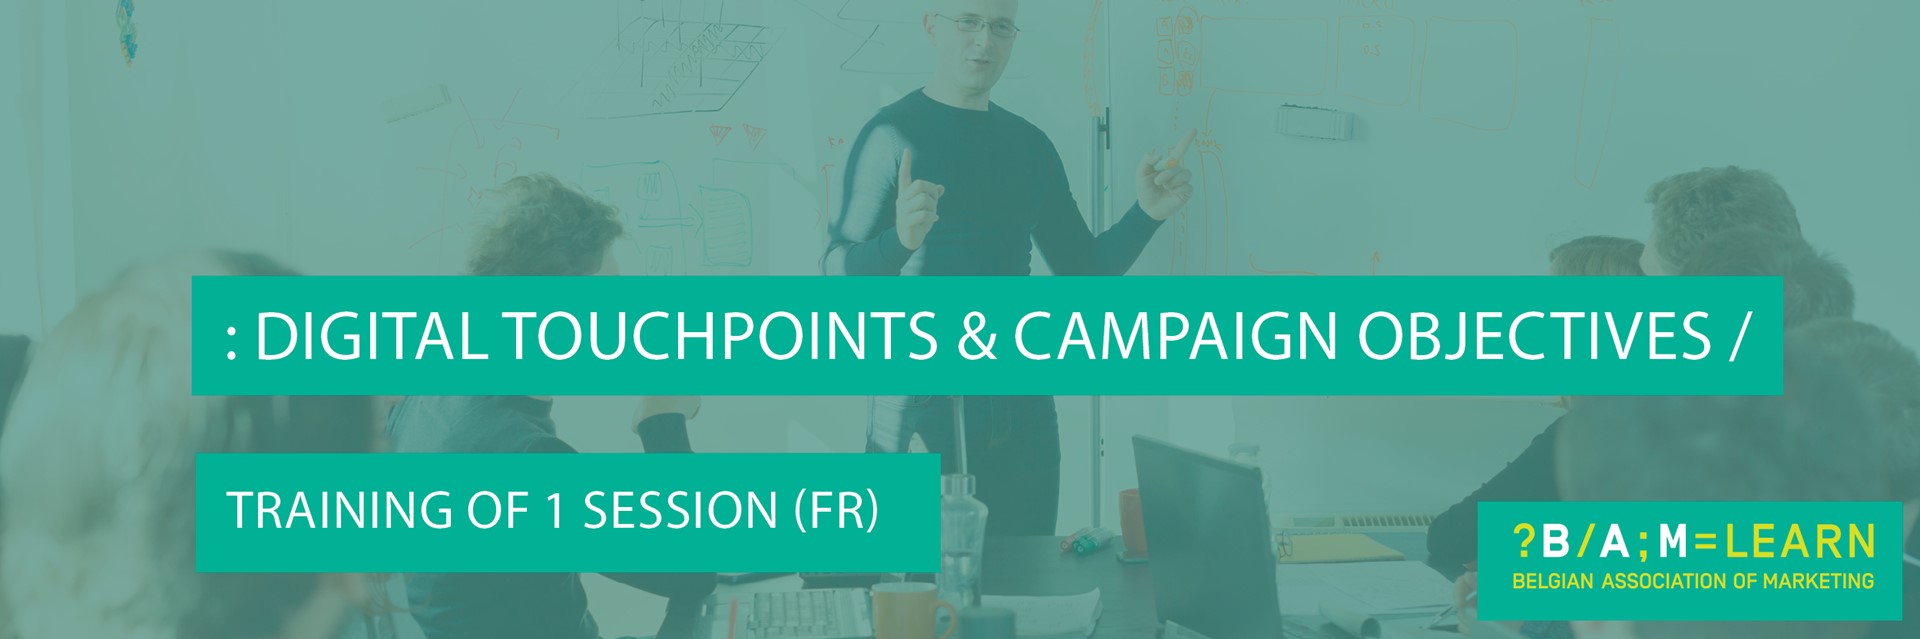 digital touchpoints campaign objectives